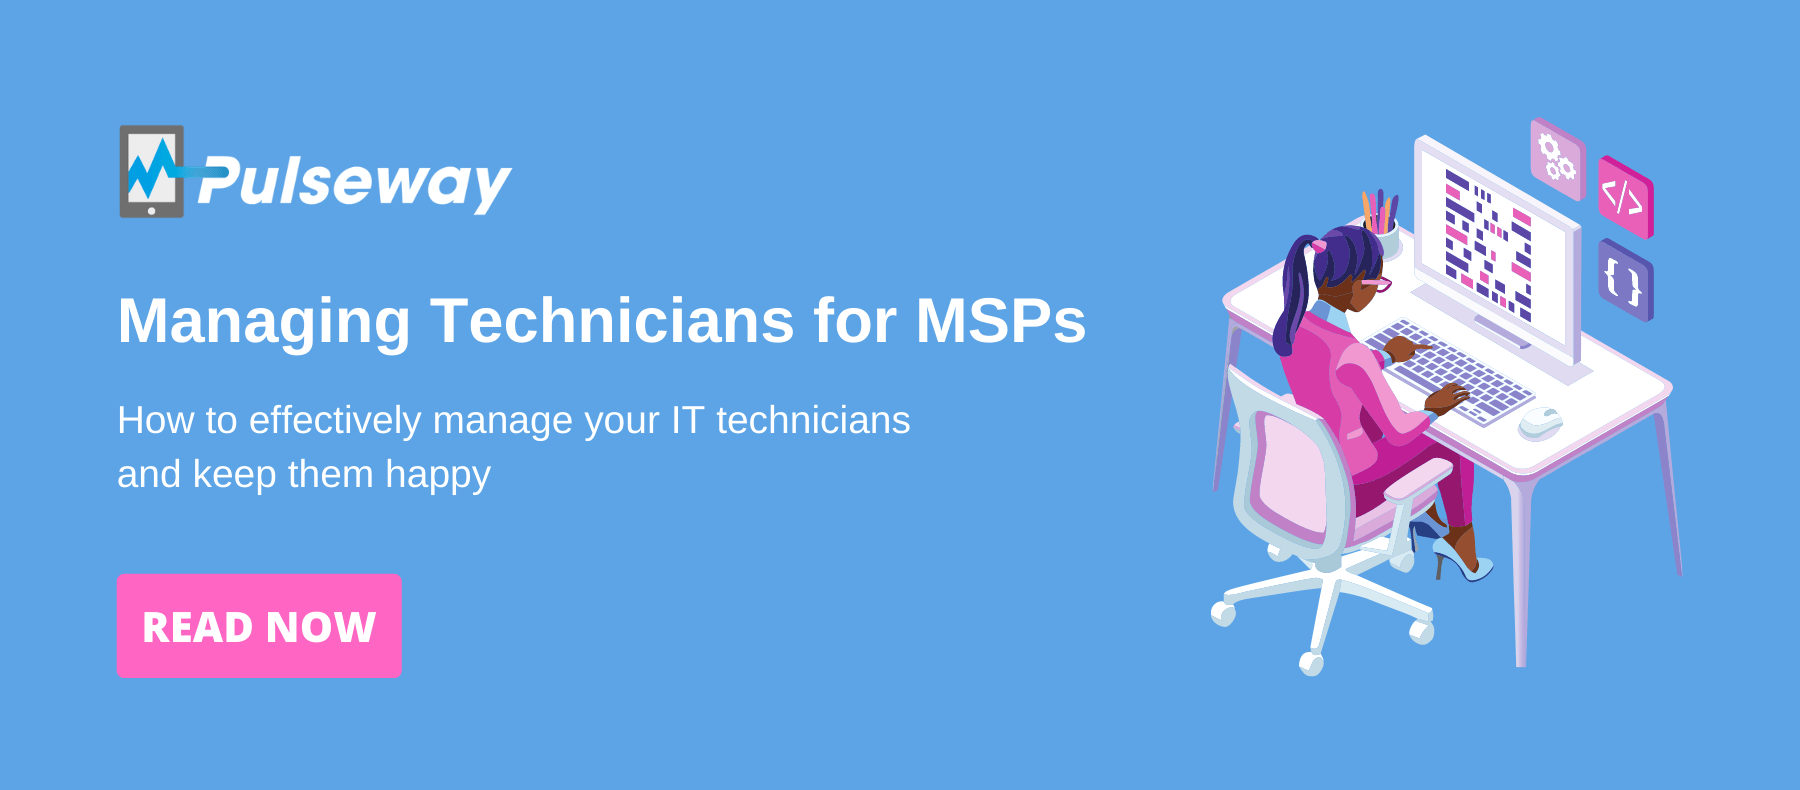 Managing Technicians for MSPs